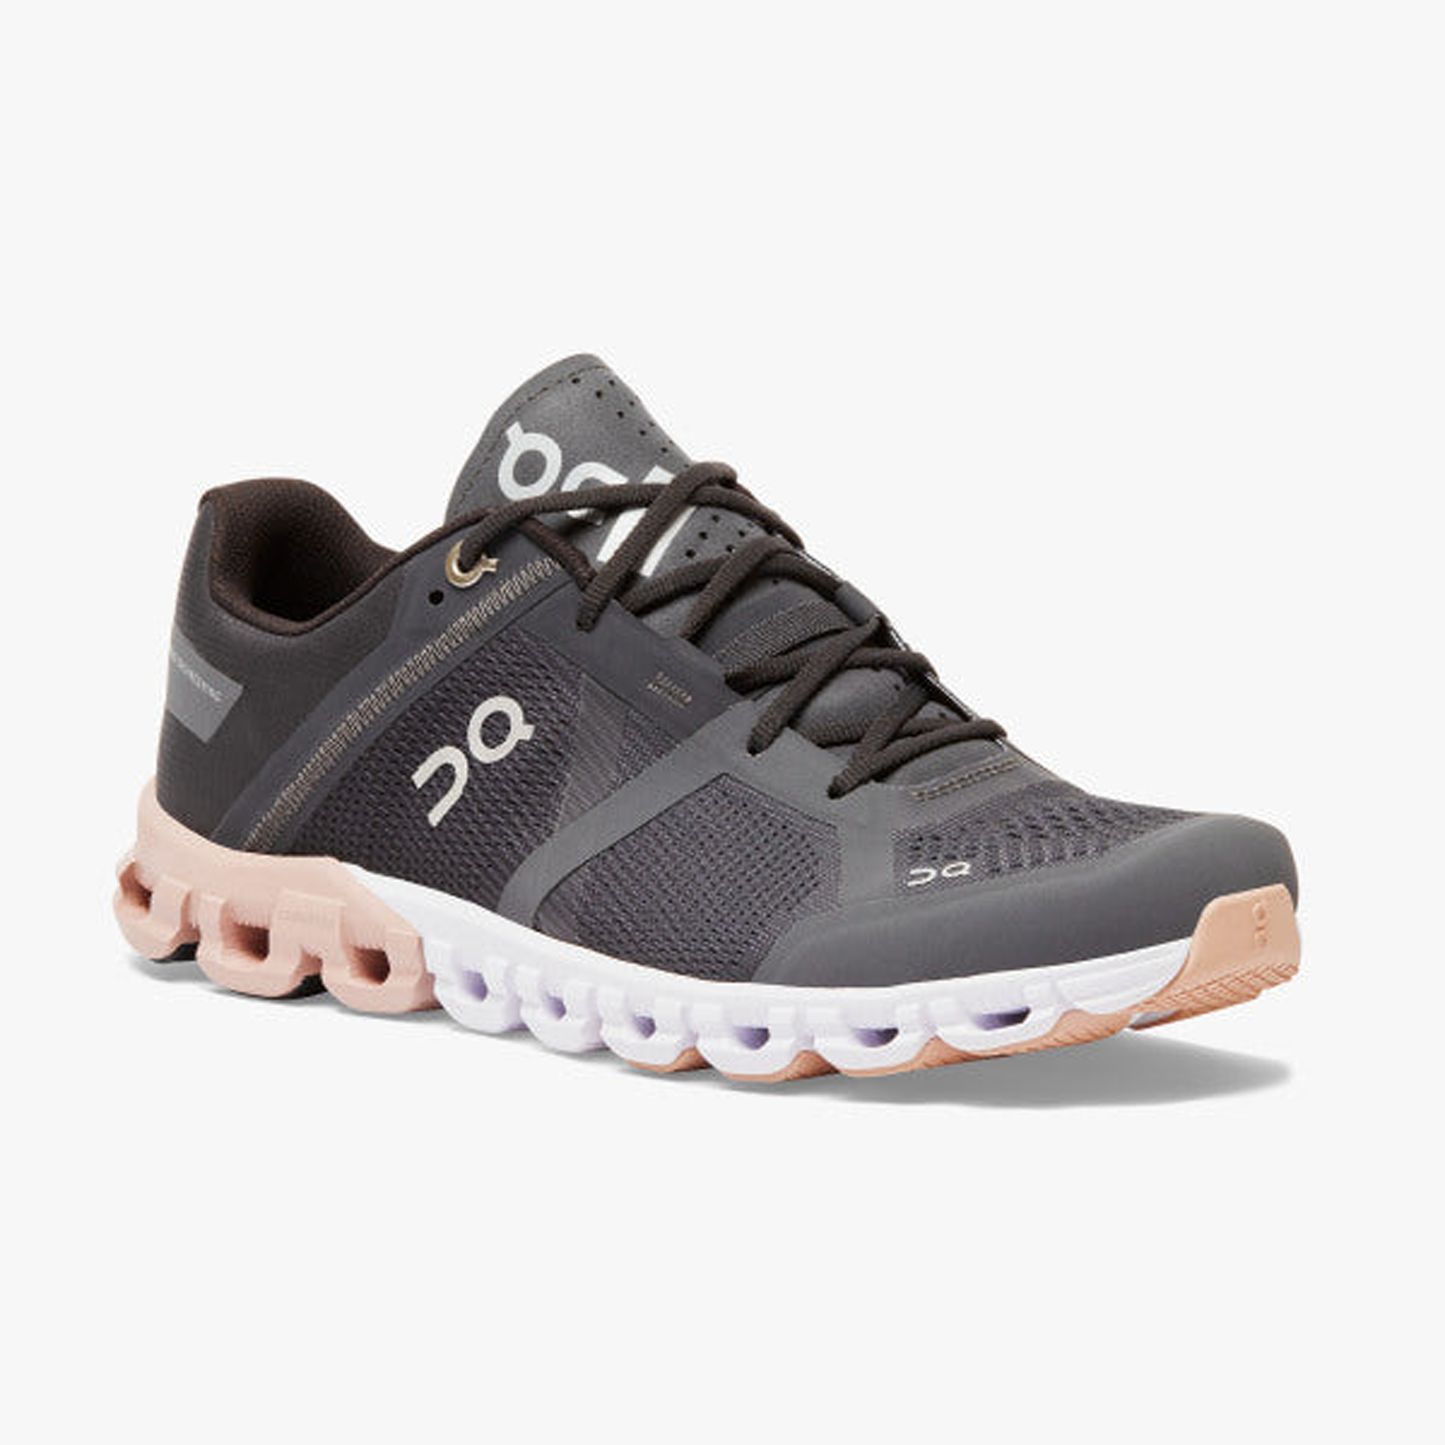 The Women's On Cloudflow running shoes in the colour rock/rose